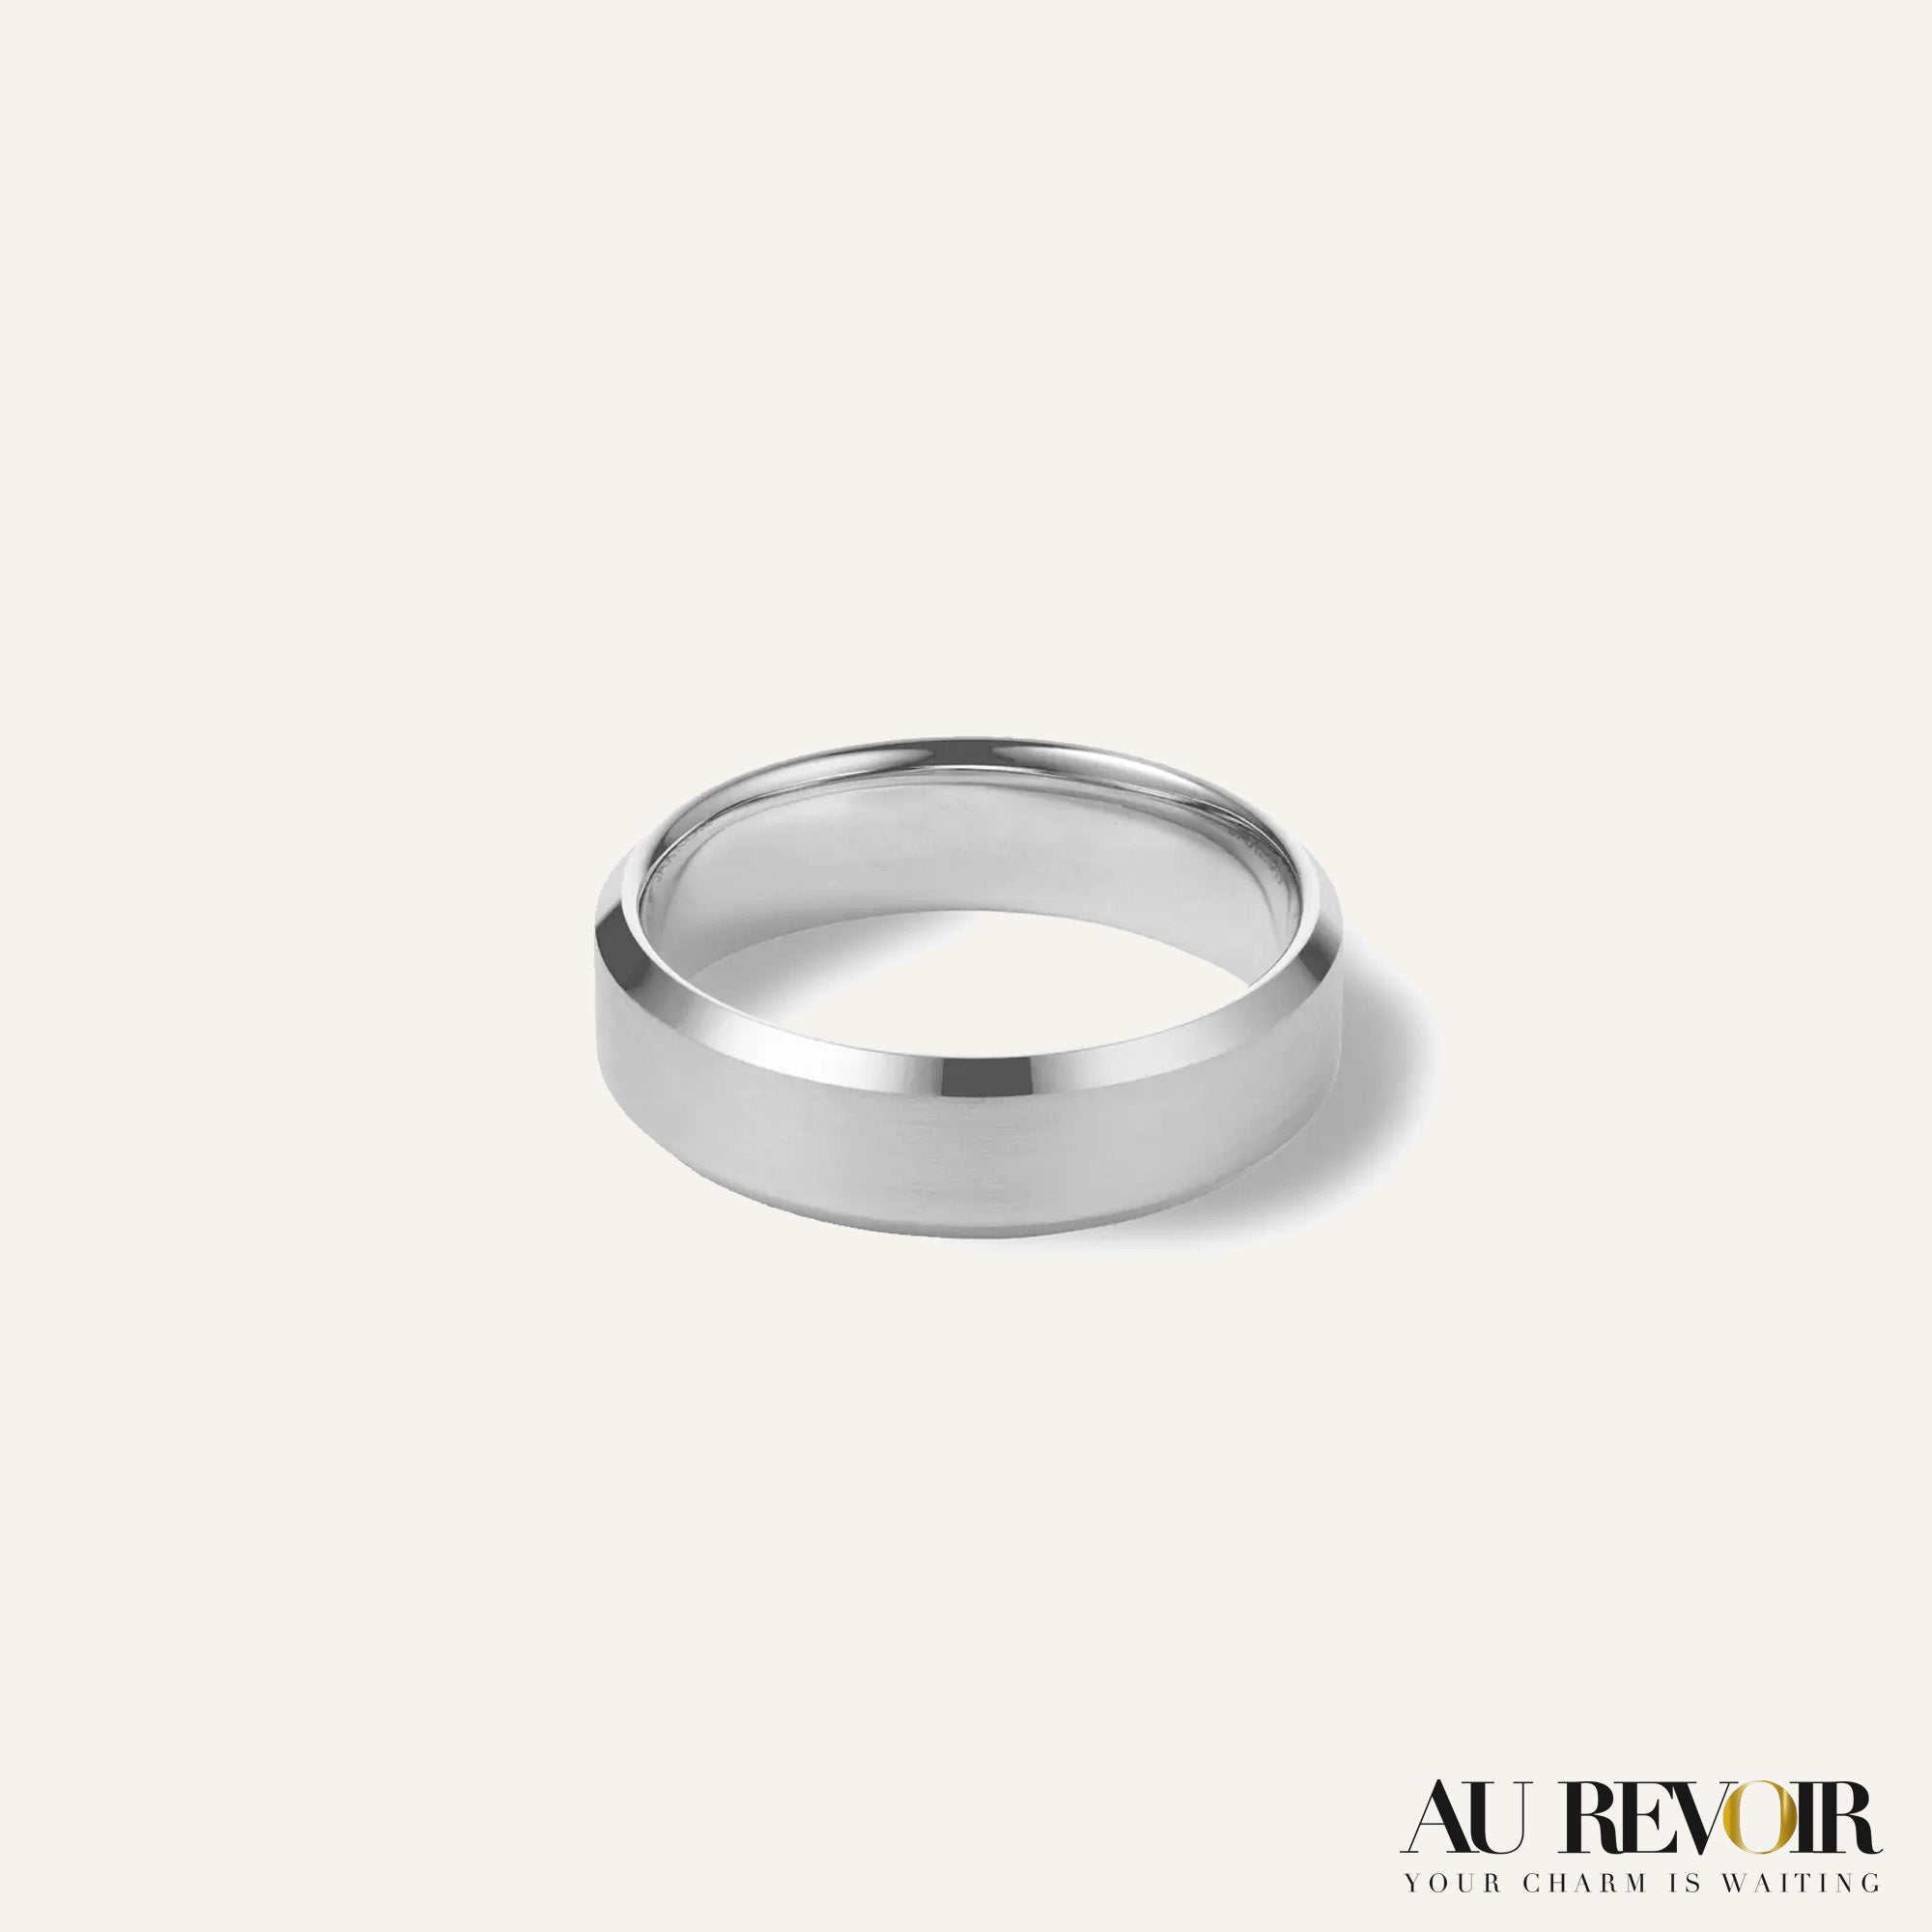 Classic Name Engraved Couple Ring | Silver Ring For Couples